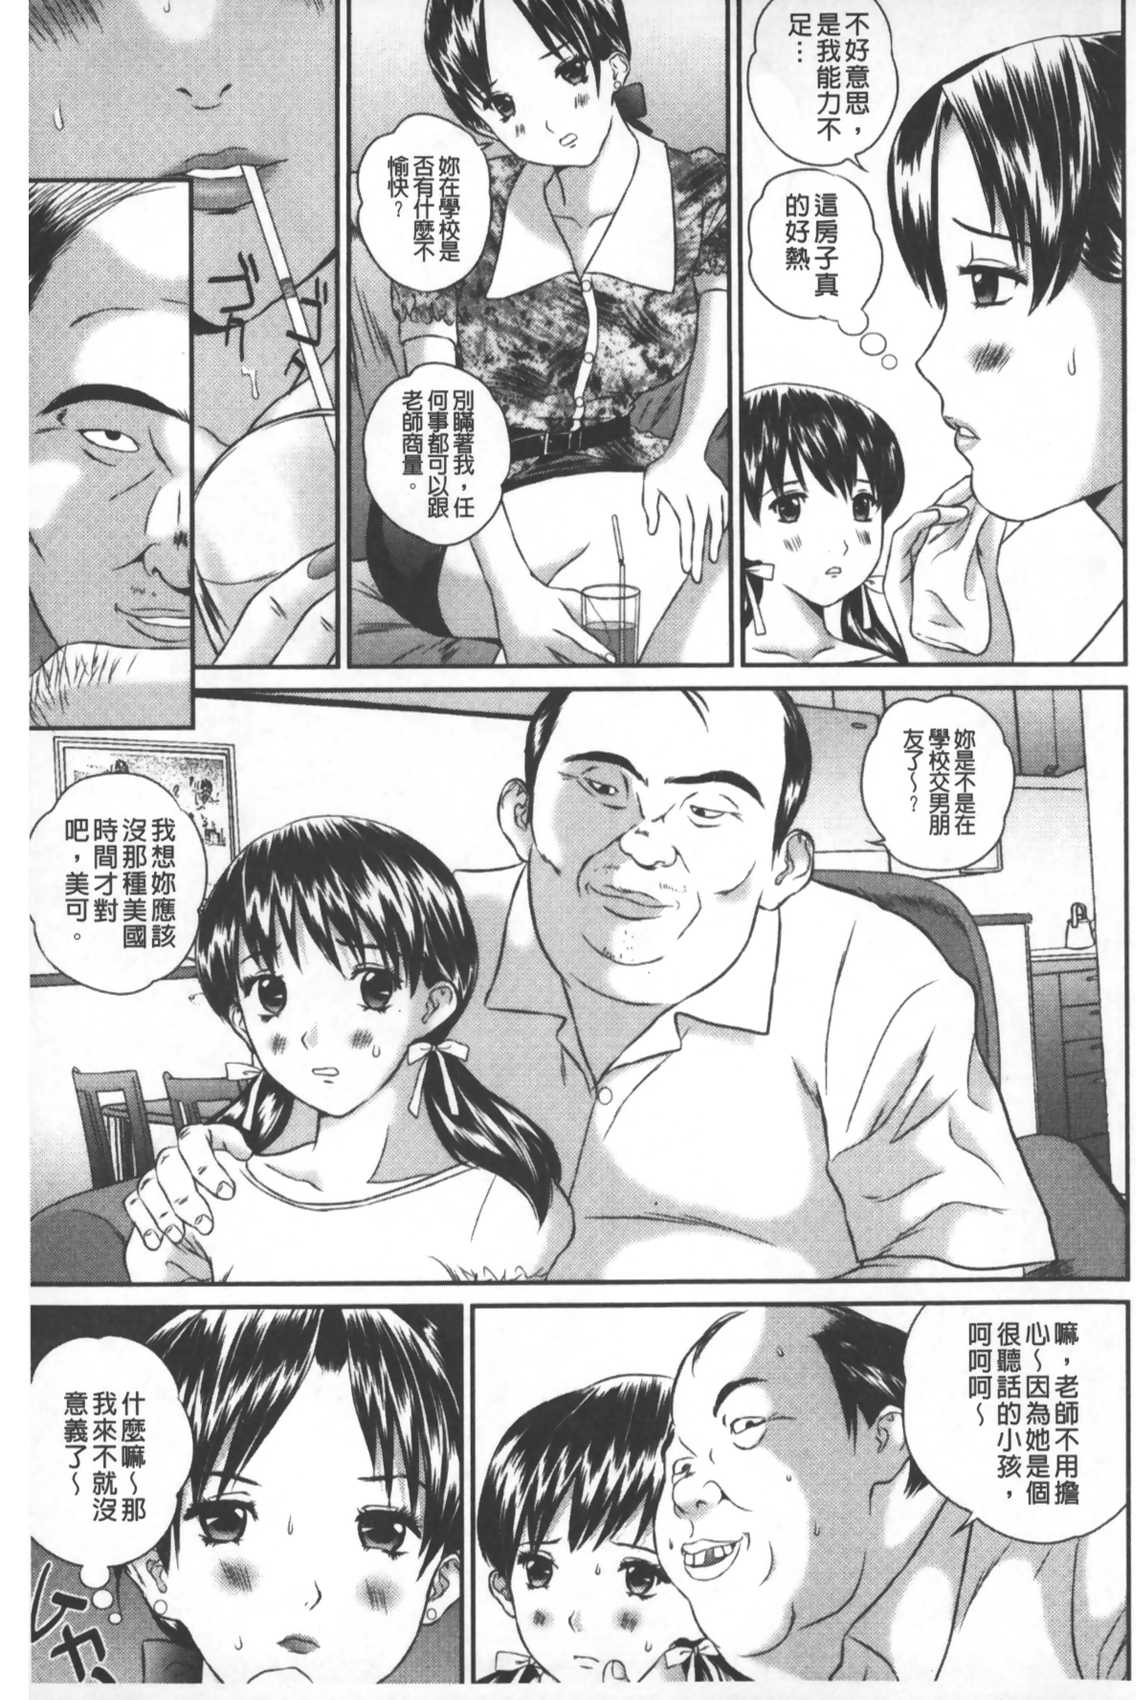 [Manzou] Tousatsu Collector | 盜拍題材精選集 [Chinese] page 46 full